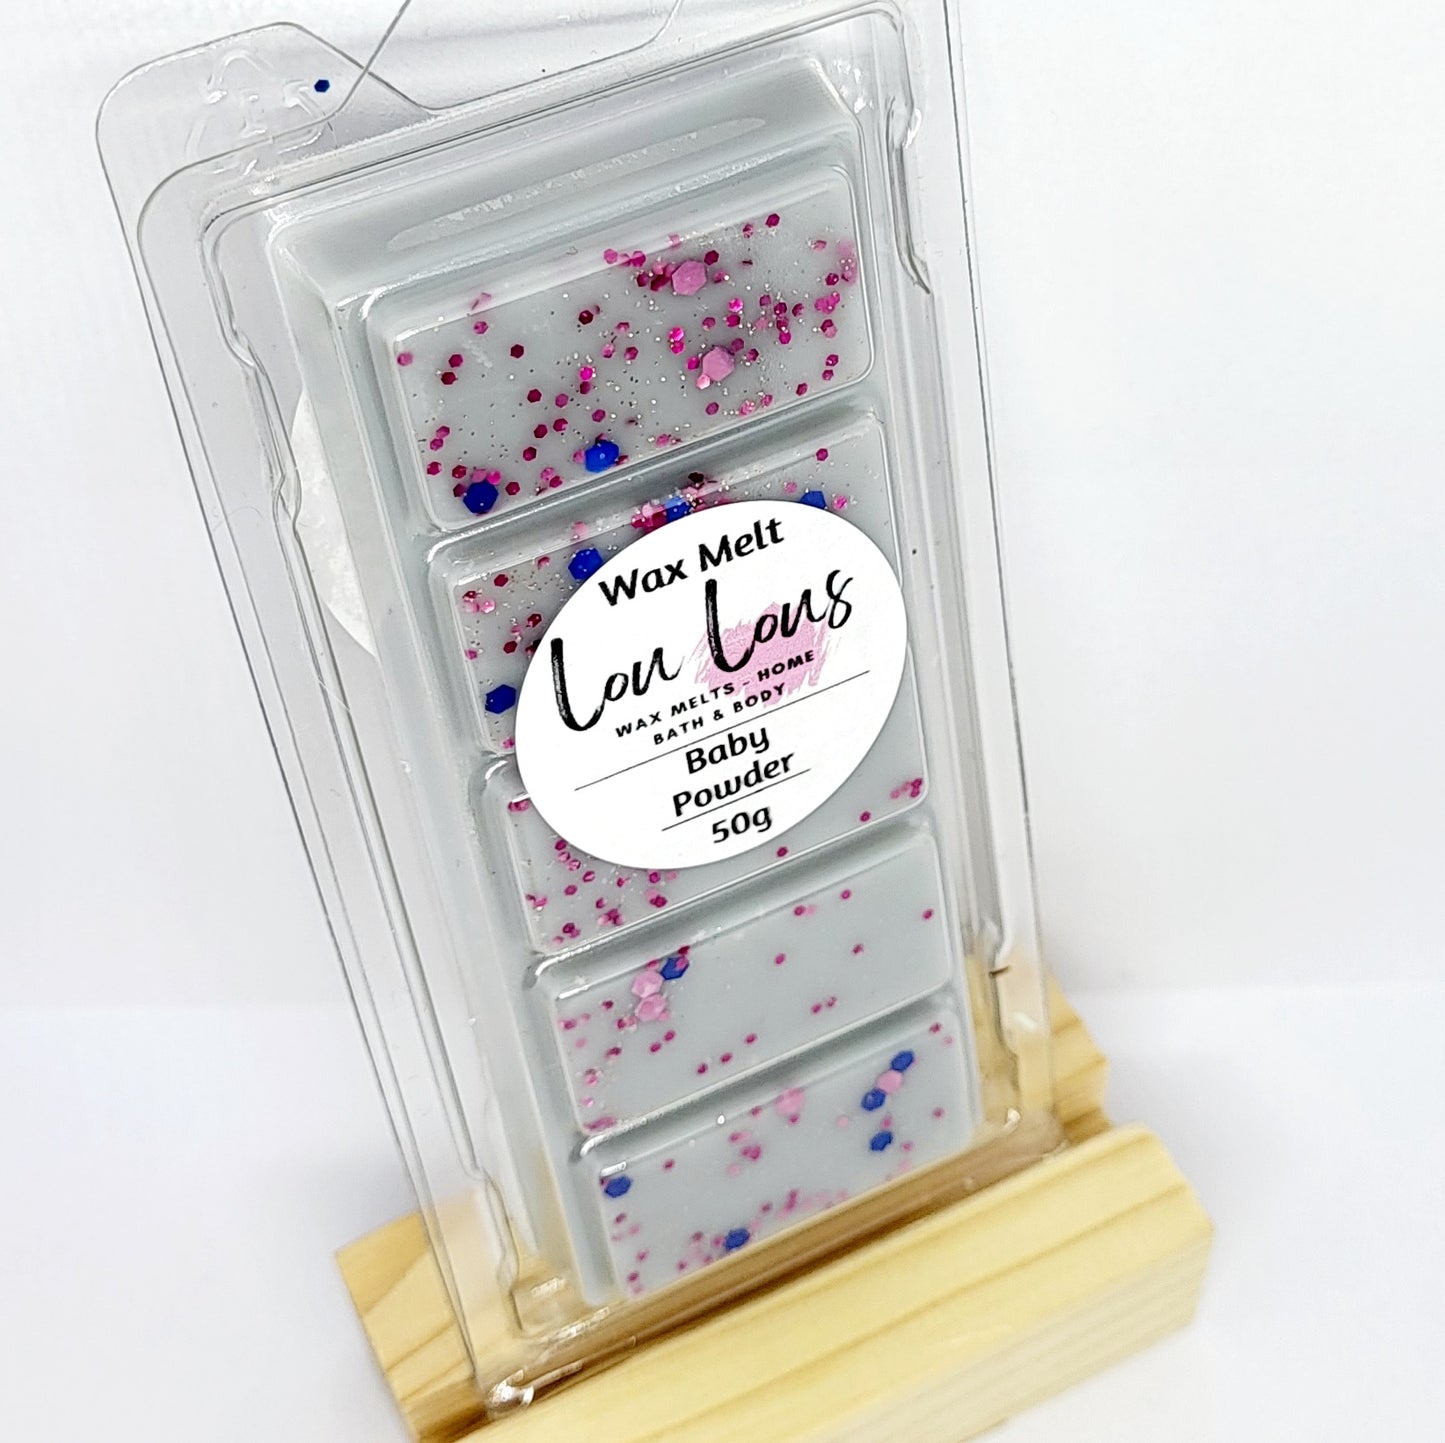 Wax melt snap bar scented in baby powder